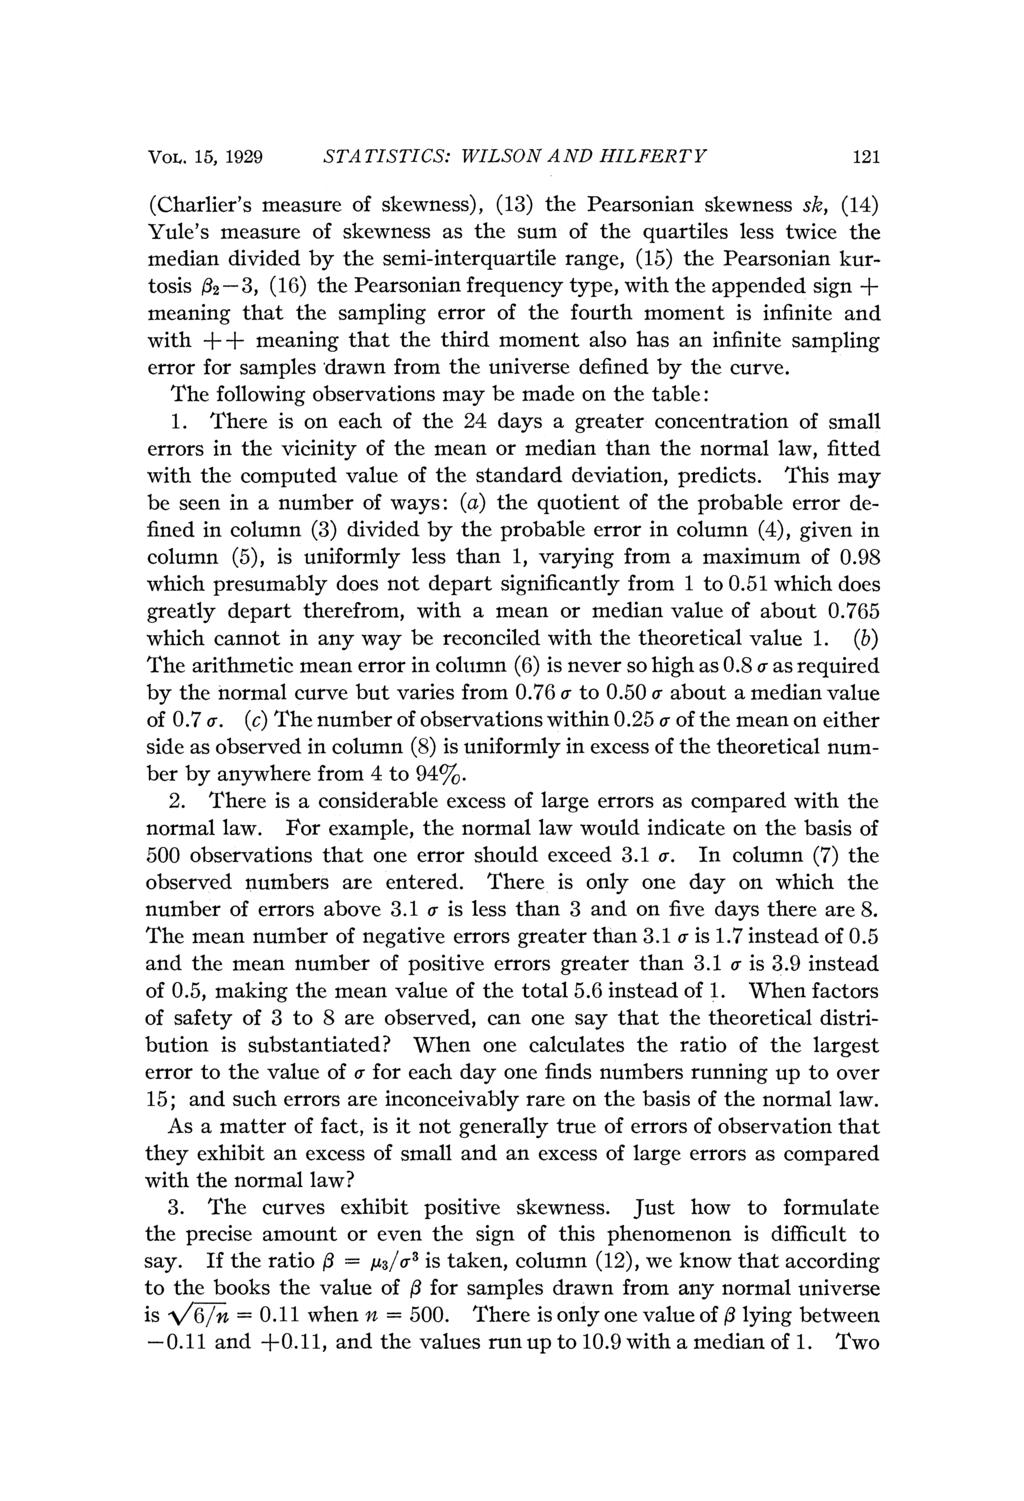 Voh. 15, 1929 STATISTICS: WILSON AND HILFERTY 121 (Charlier's measure of skewness), (13) the Pearsonian skewness sk, (14) Yule's measure of skewness as the sum of the quartiles less twice the median